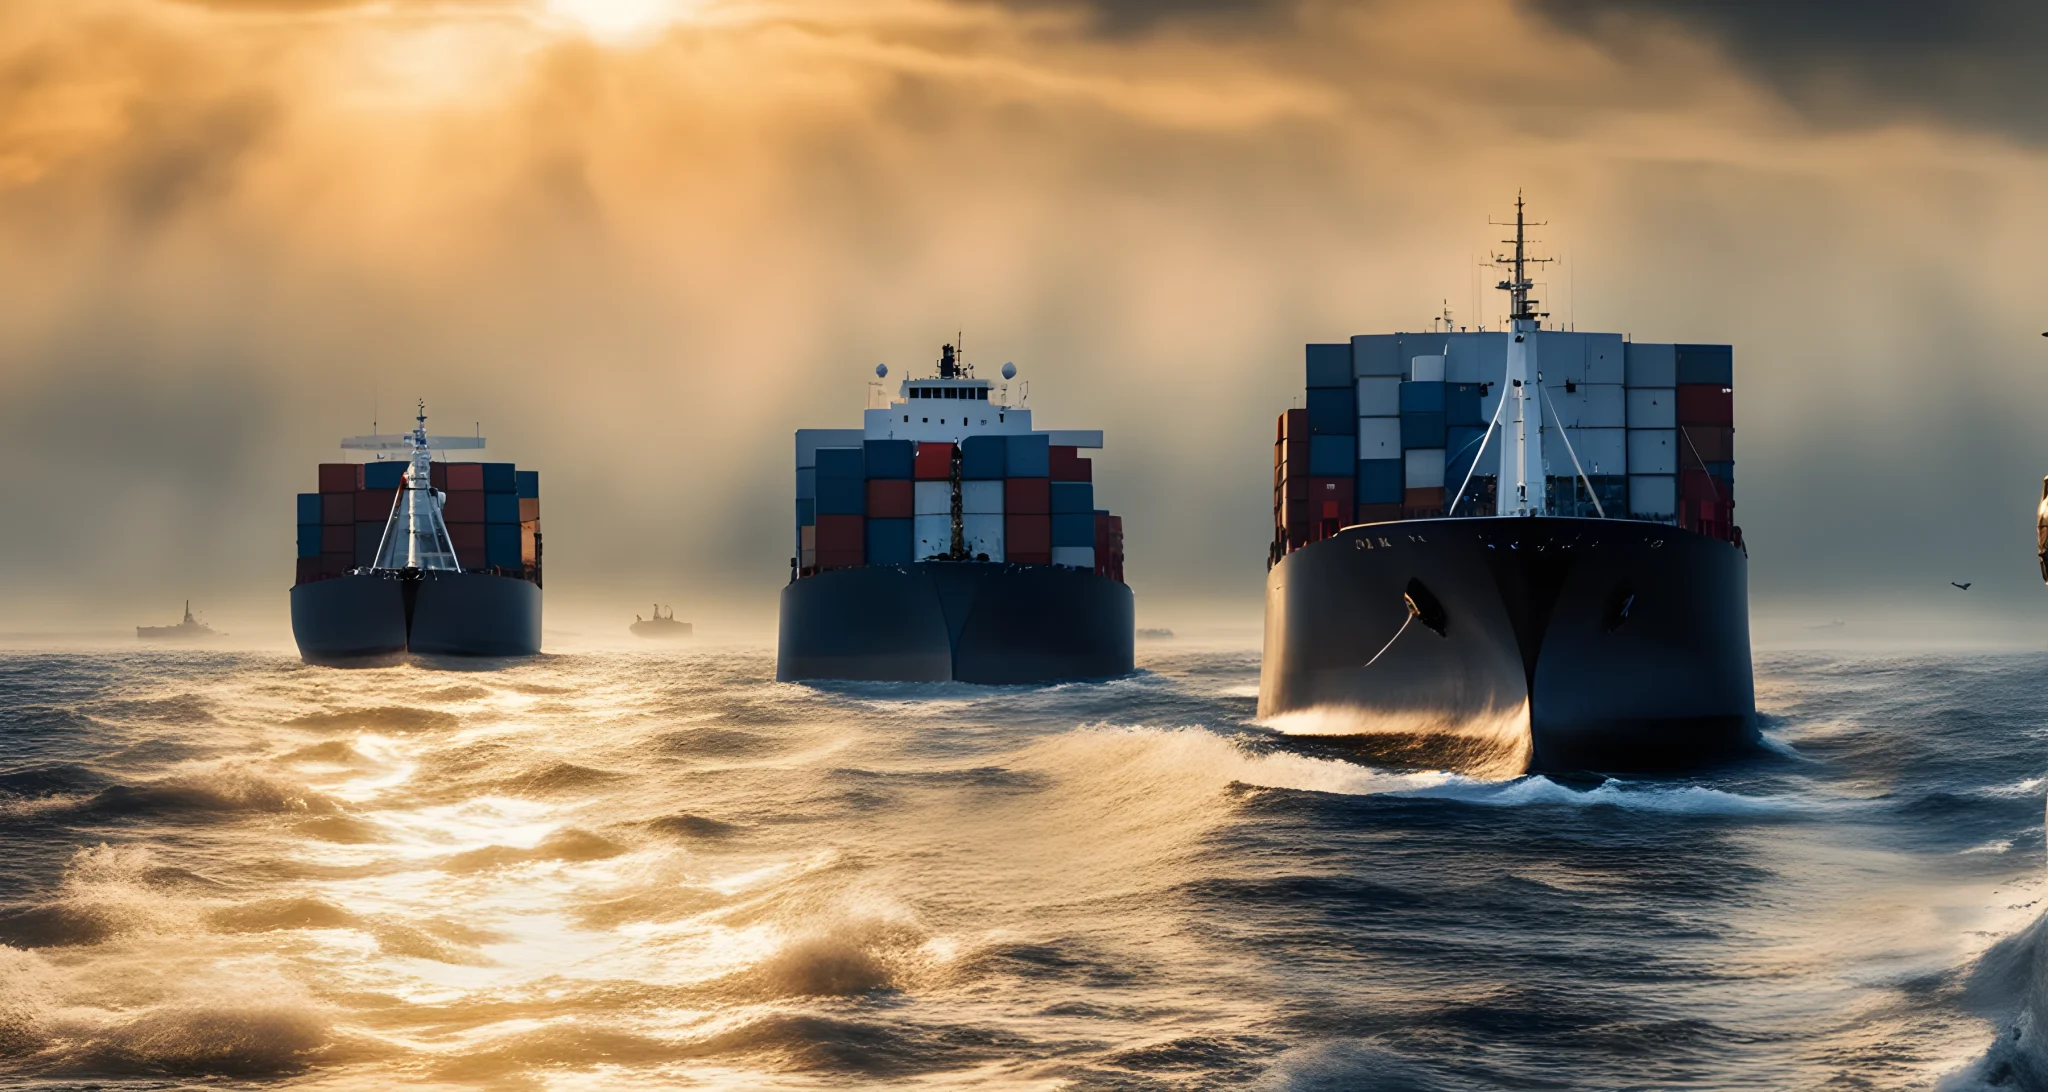 In the image, there are two cargo ships sailing on the sea.